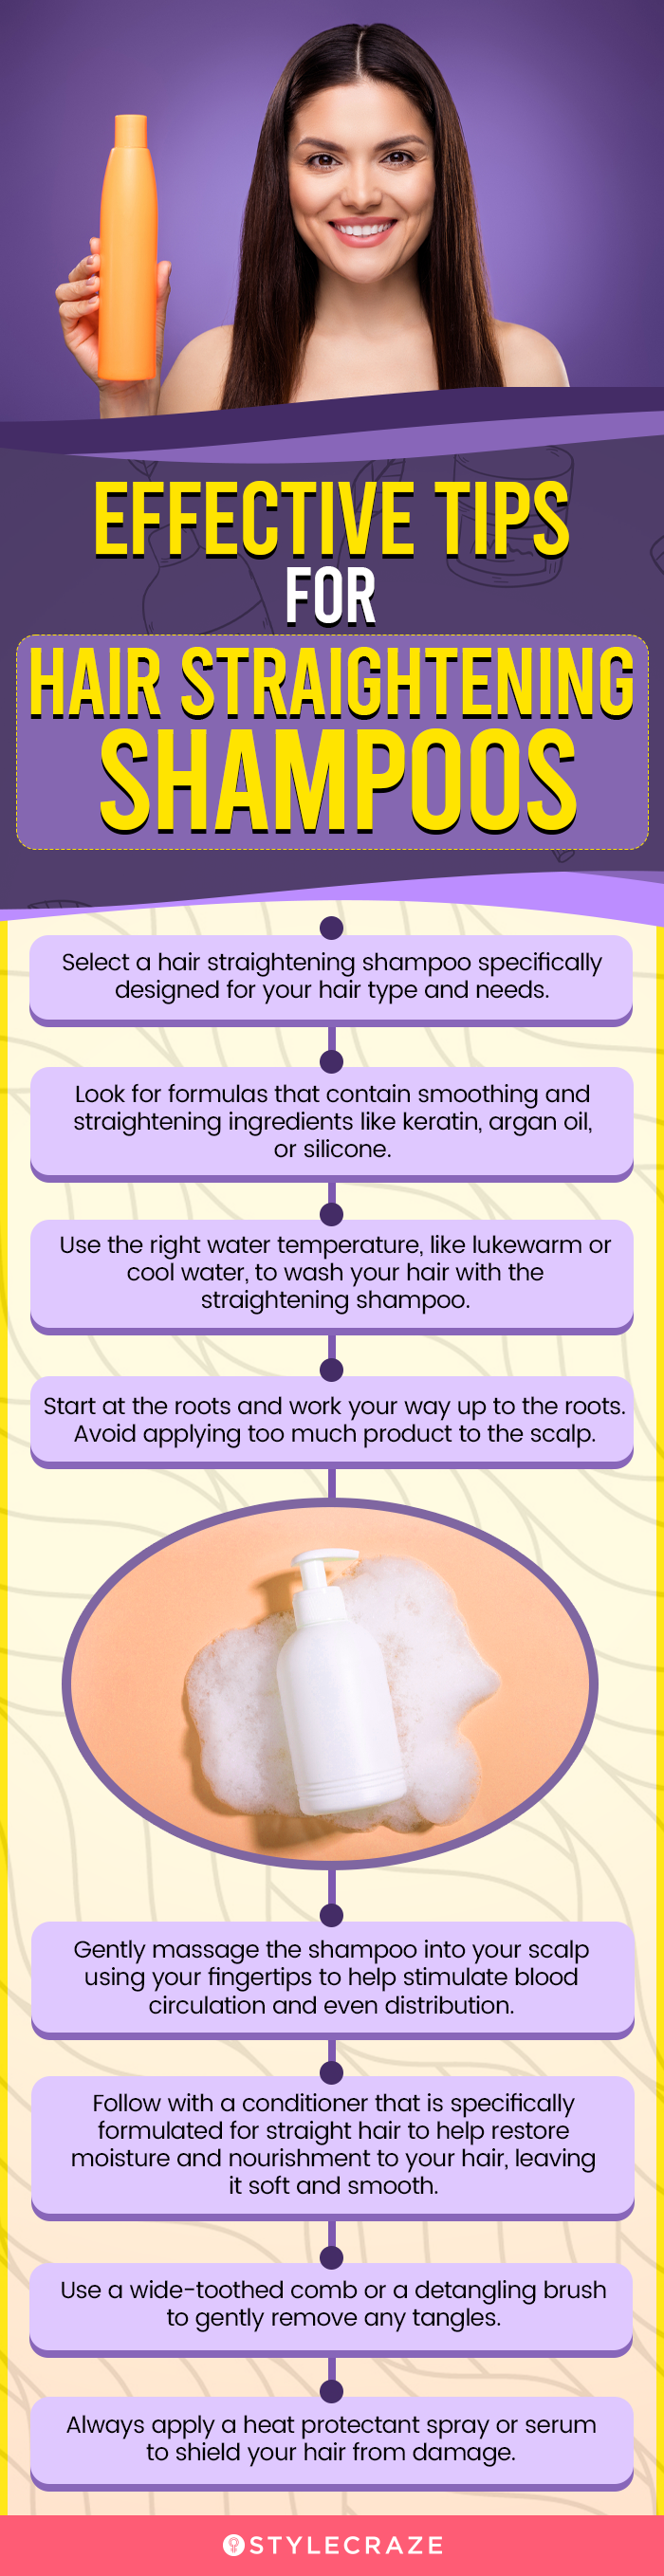 Effective Tips For Using Hair Straightening Shampoos (infographic)